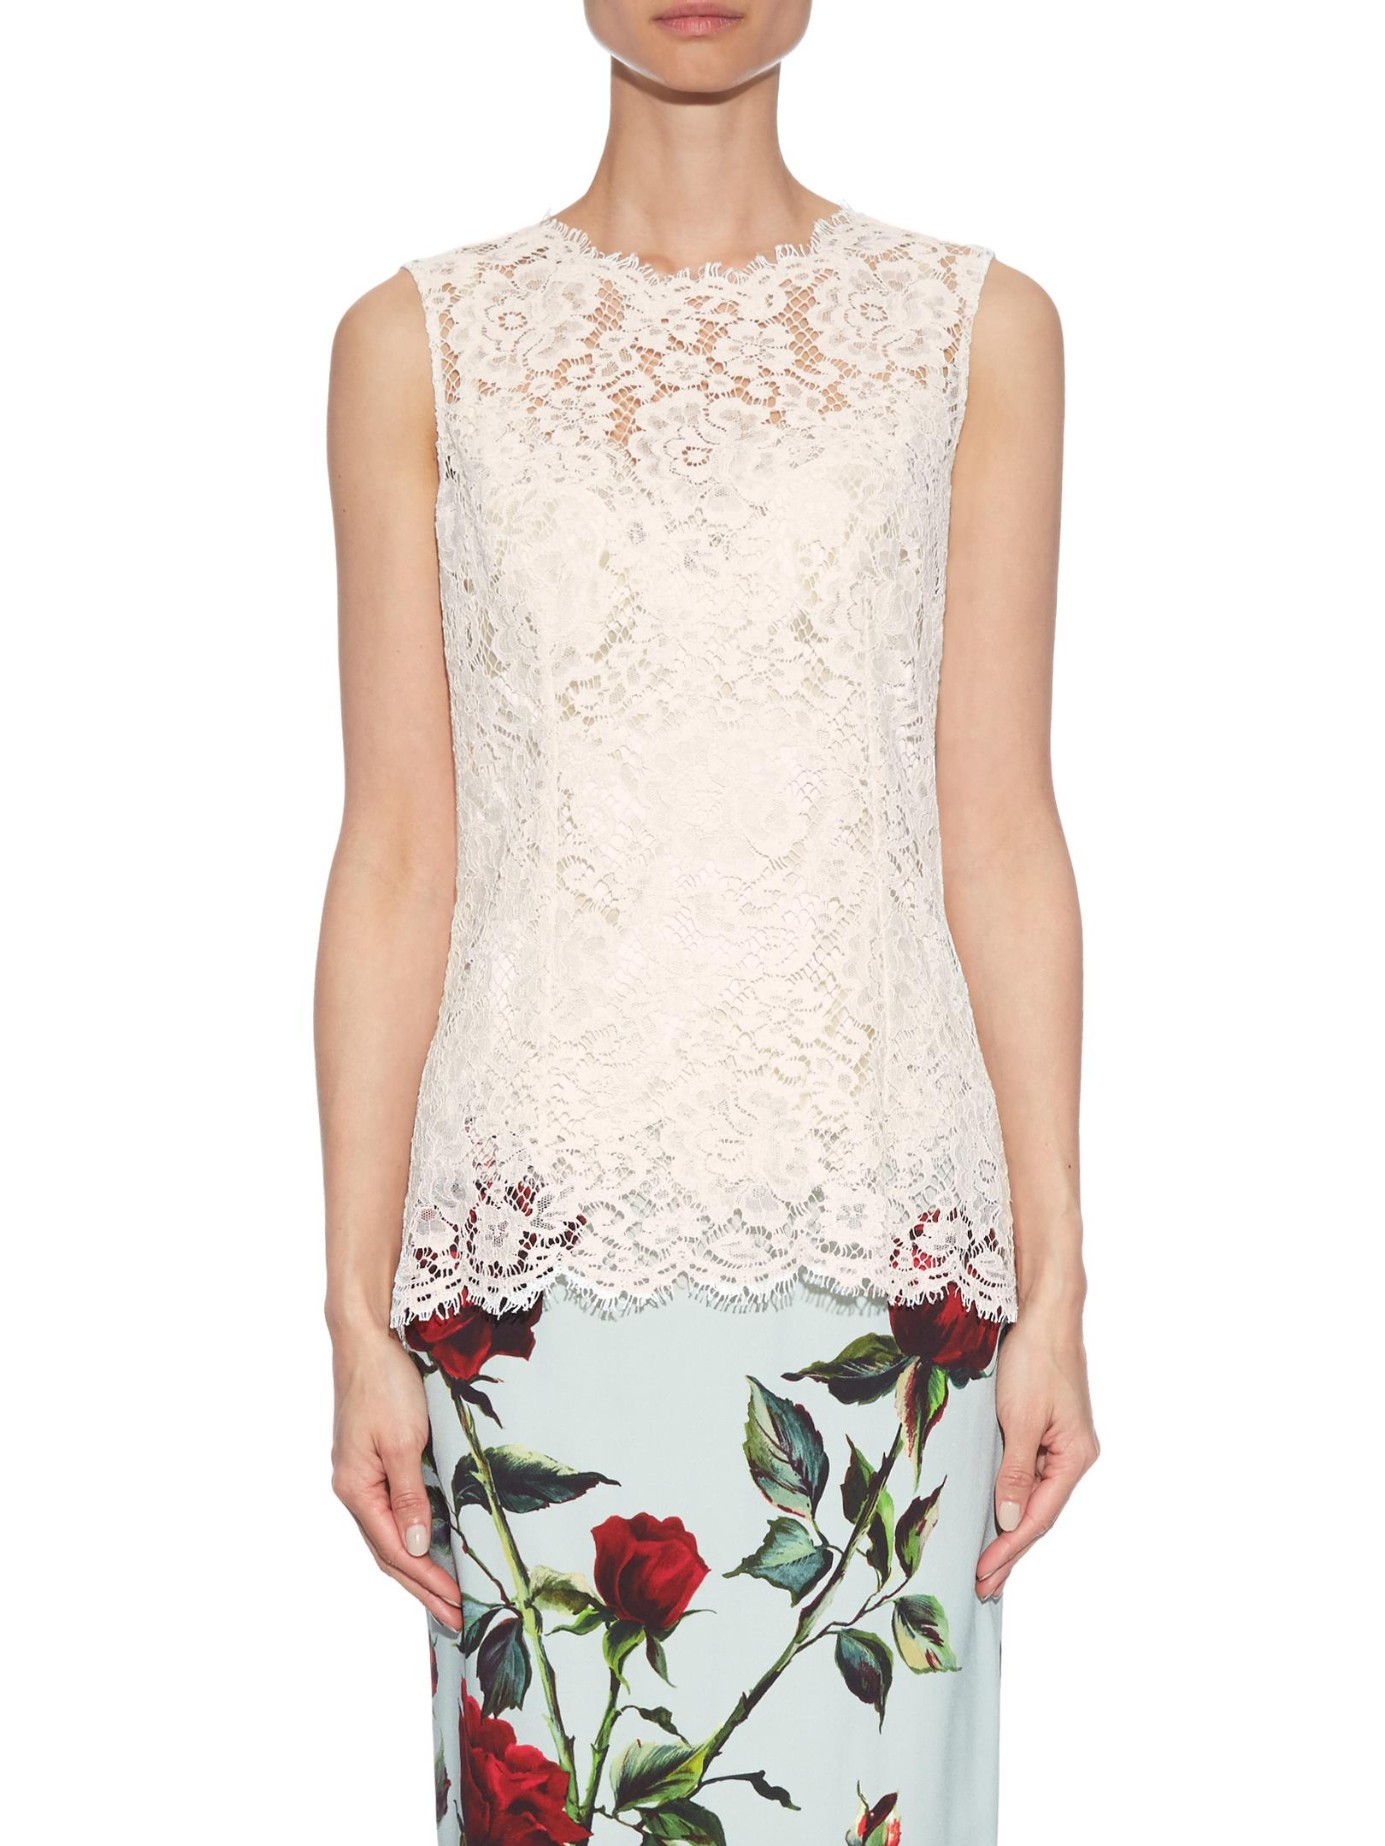 dolce and gabbana lace top